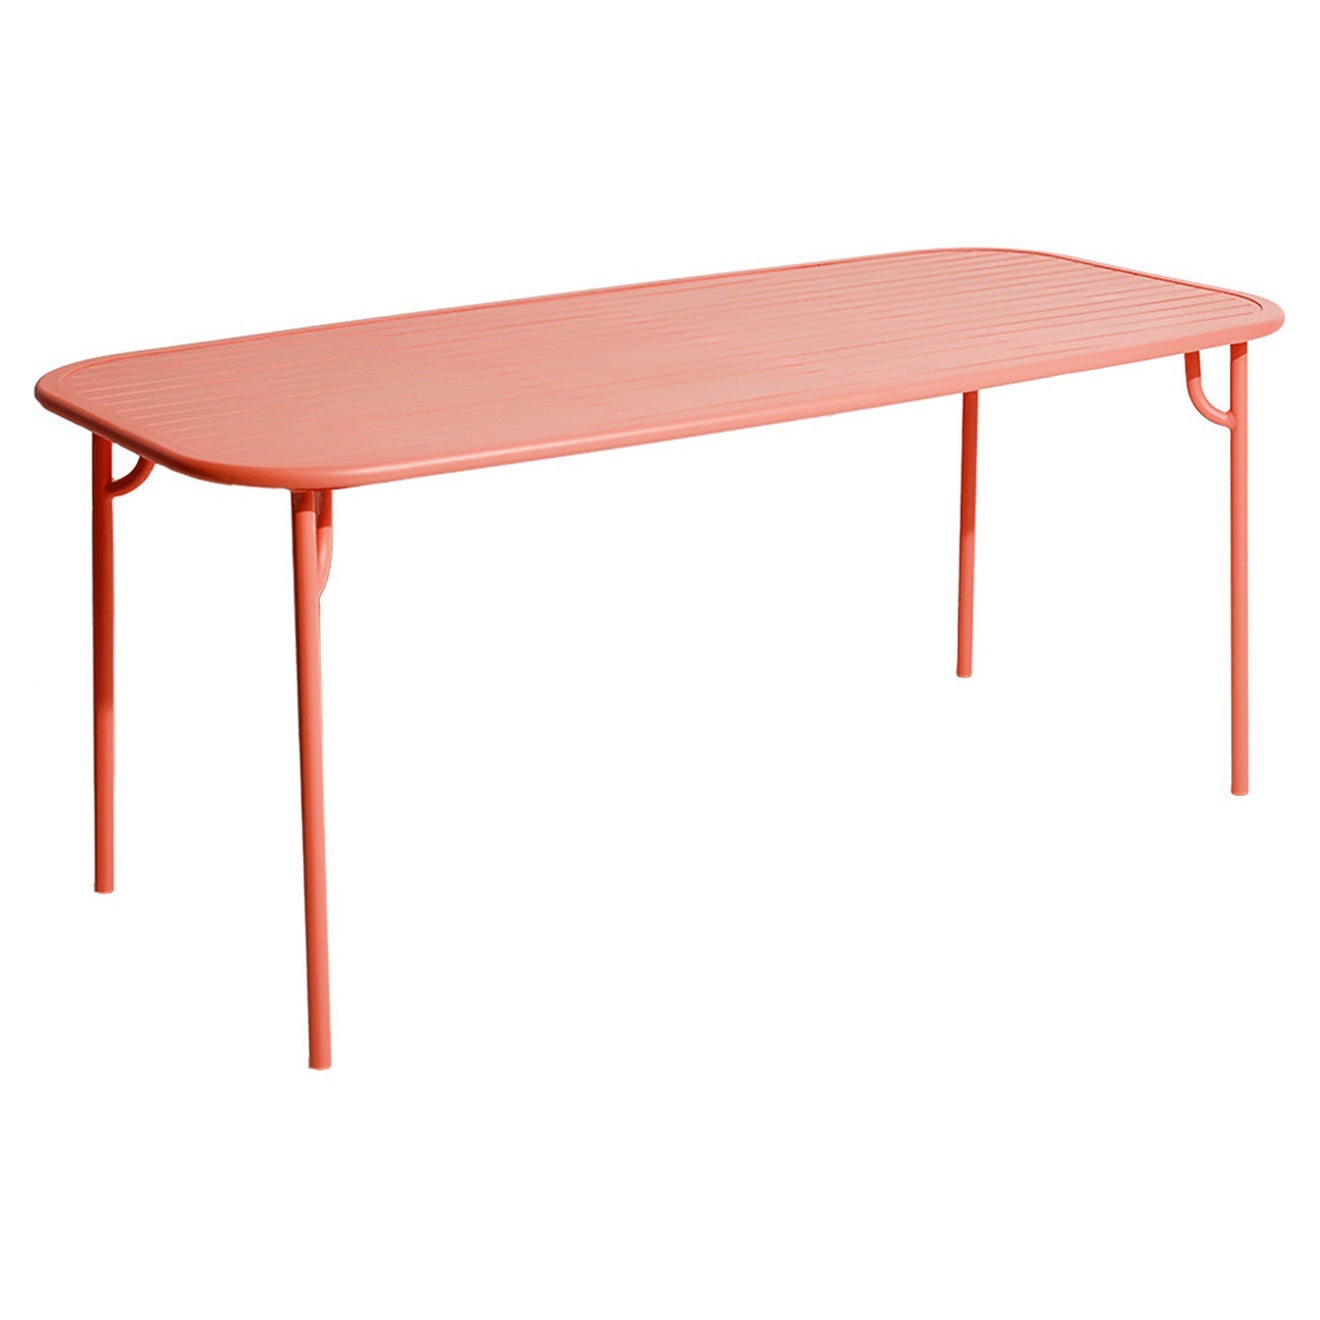 Petite Friture Week-End Medium Rectangular Dining Table in Coral with Slats For Sale